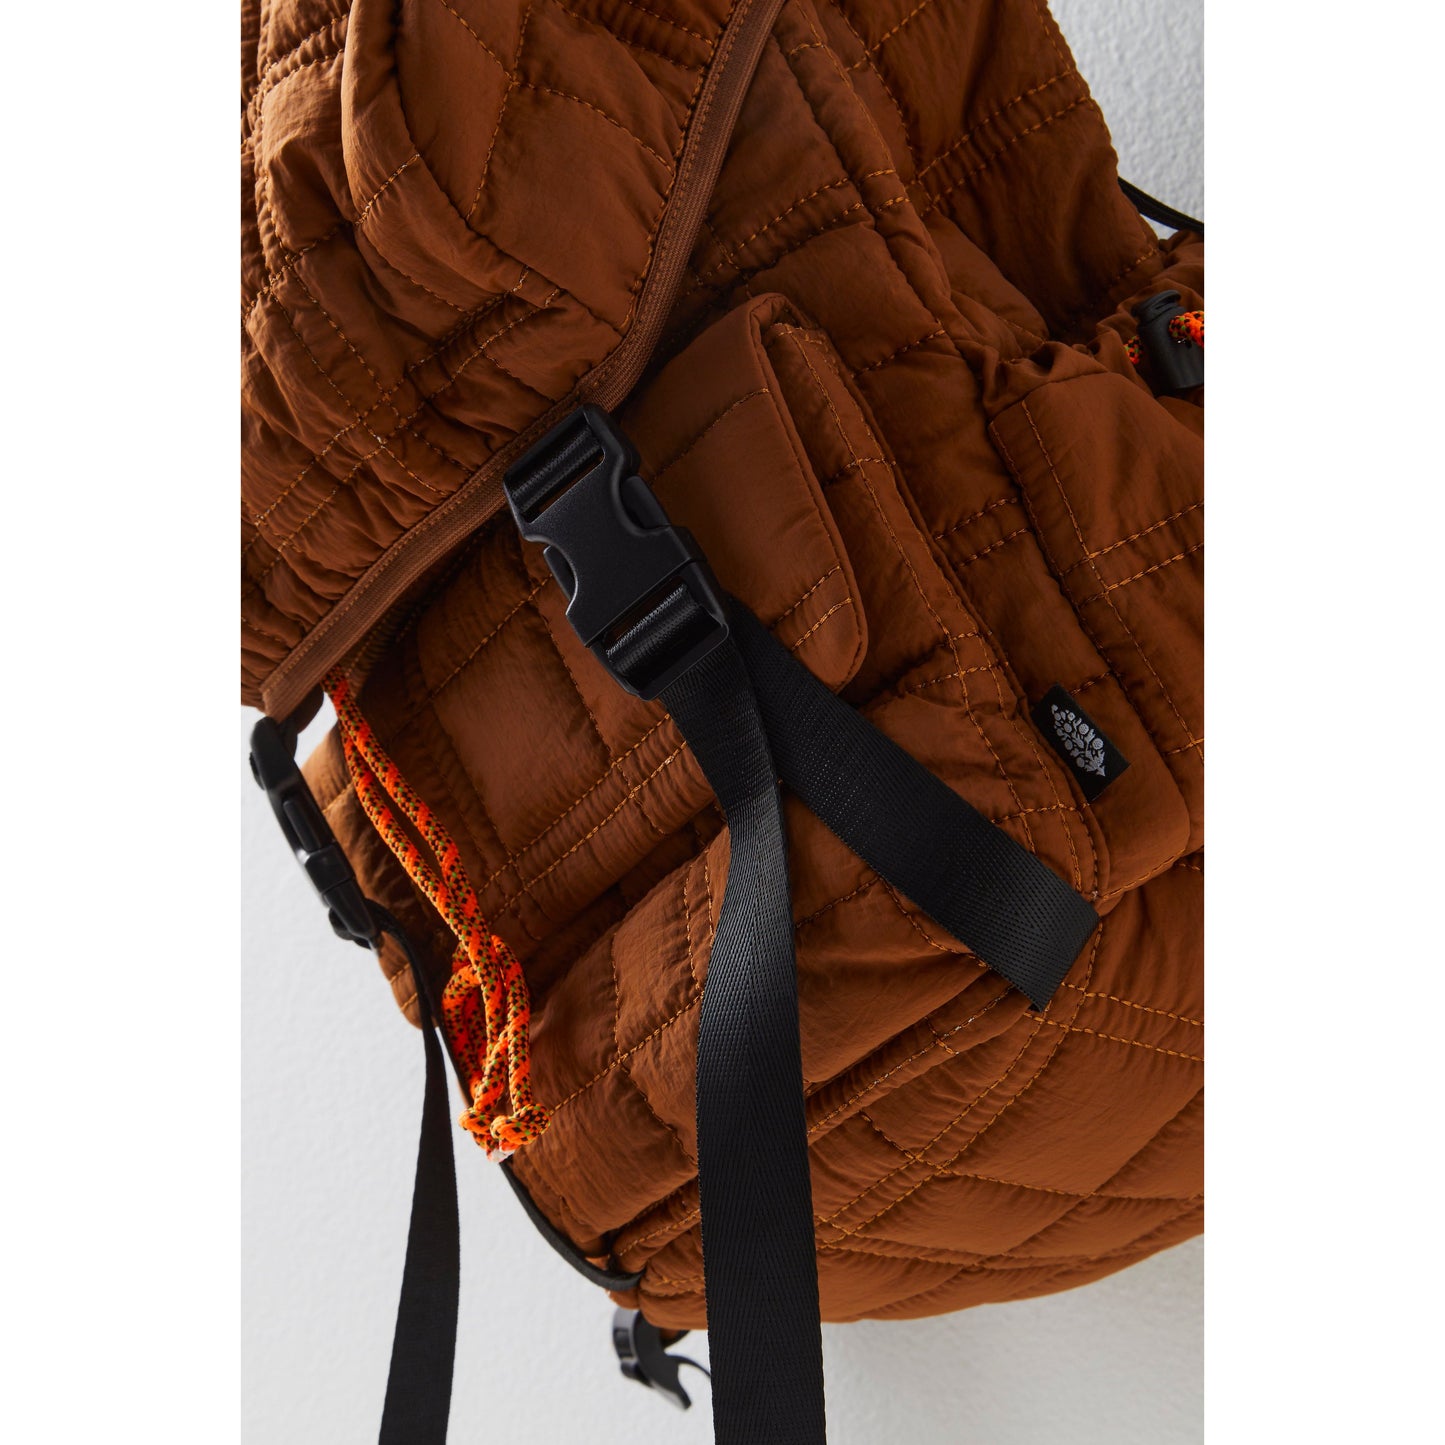 Close-up of a Free People Movement Summit Backpack in Brown with adjustable shoulder straps and a flap-top closure, featuring an orange and black rope detail.